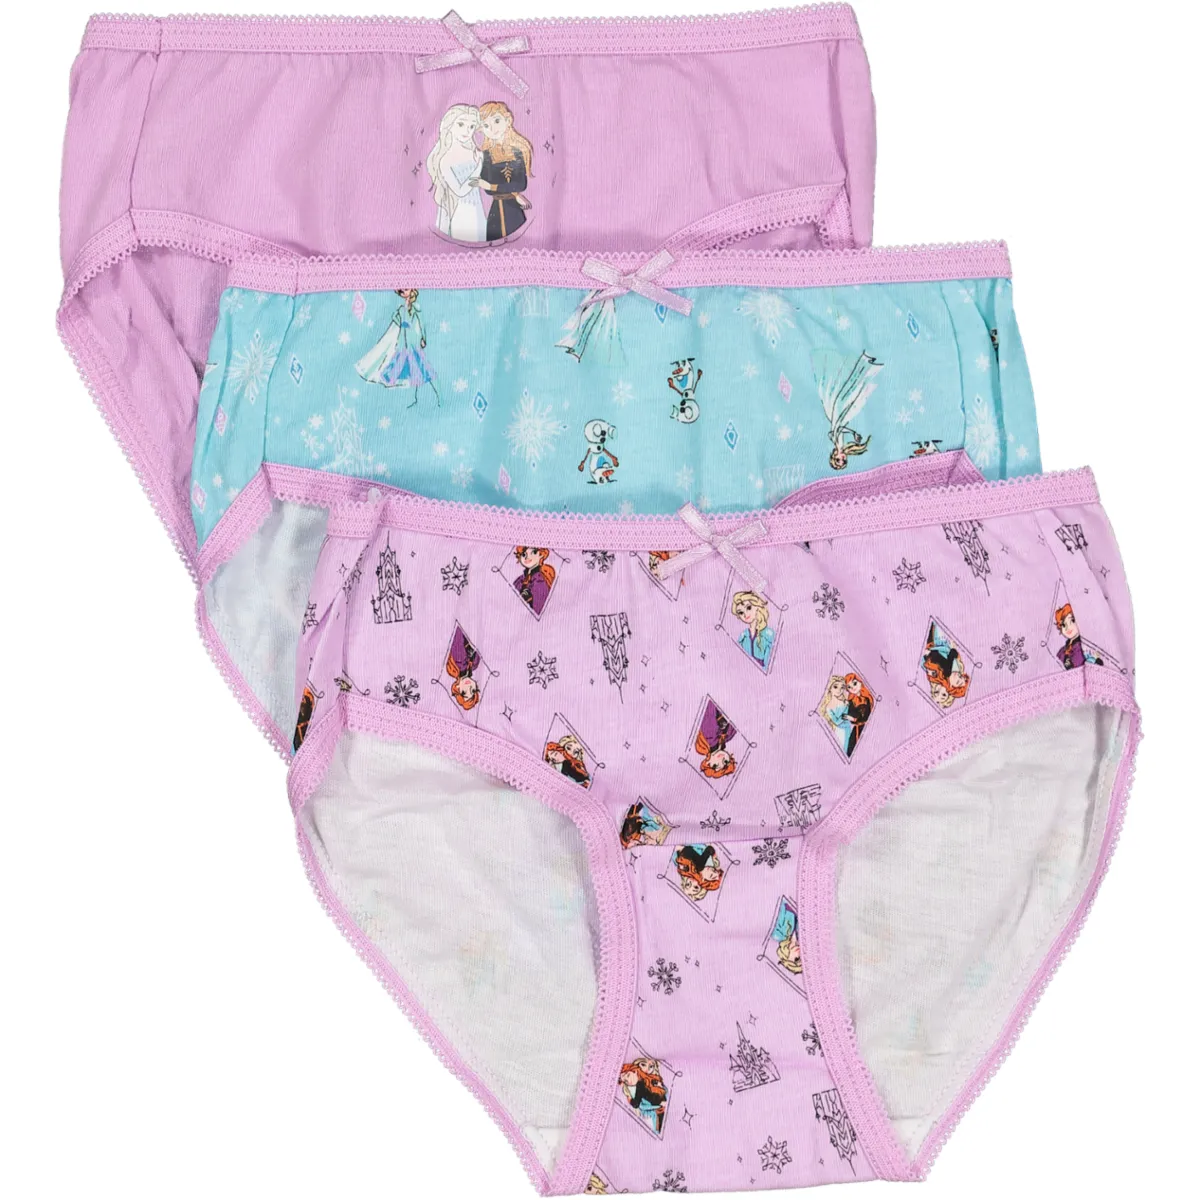 Panty Younger Girls 3 Pack, Babies & Kids